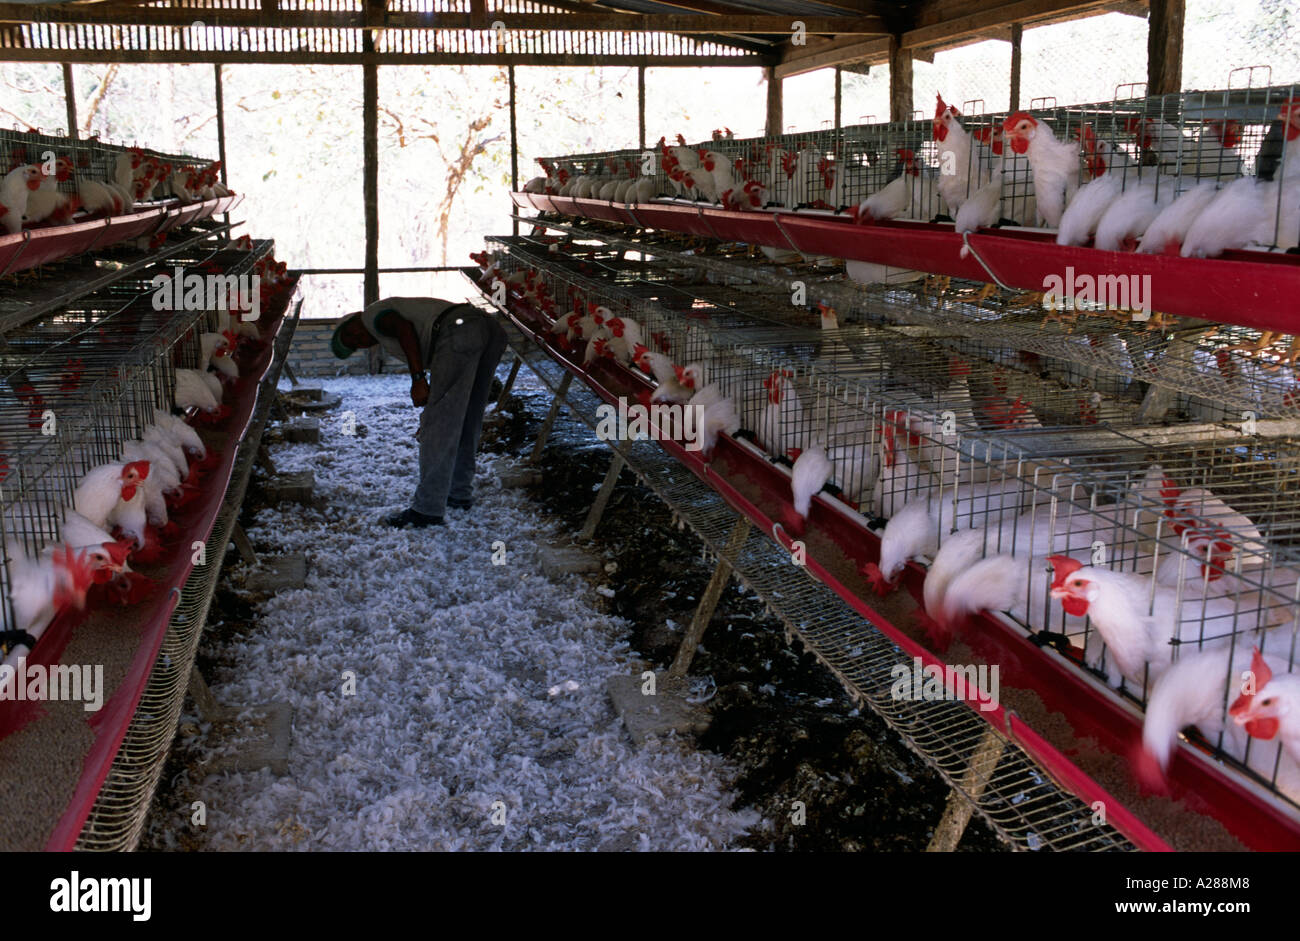 Battery chickens in their confined cages at a farm in rural Honduras Stock  Photo - Alamy